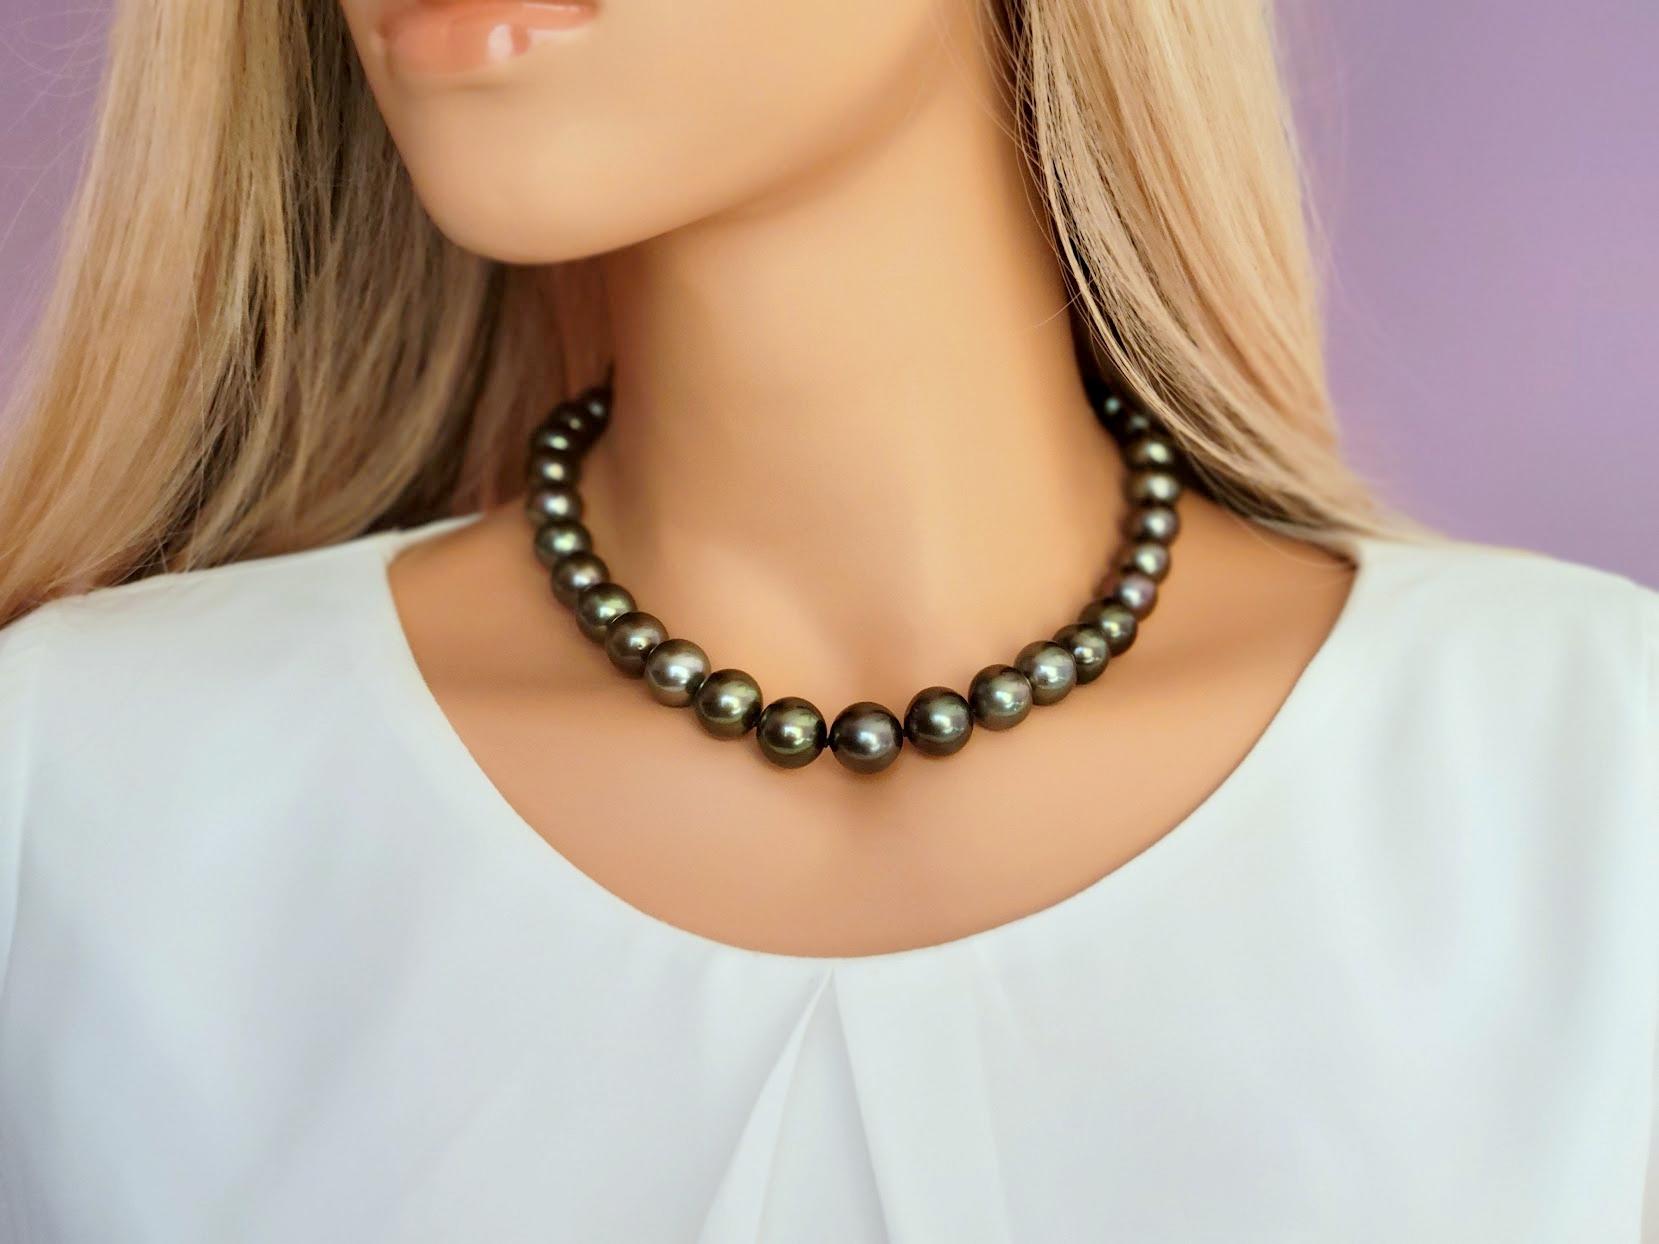 The length of the necklace is 17.5 inches (44.5 cm). The large size of the smooth, round, high-quality beads varies from 12 mm to 14 mm.
The most highly prized Black pearls are those of the iridescent Peacock, Green, and Blue colors. The Peacock,